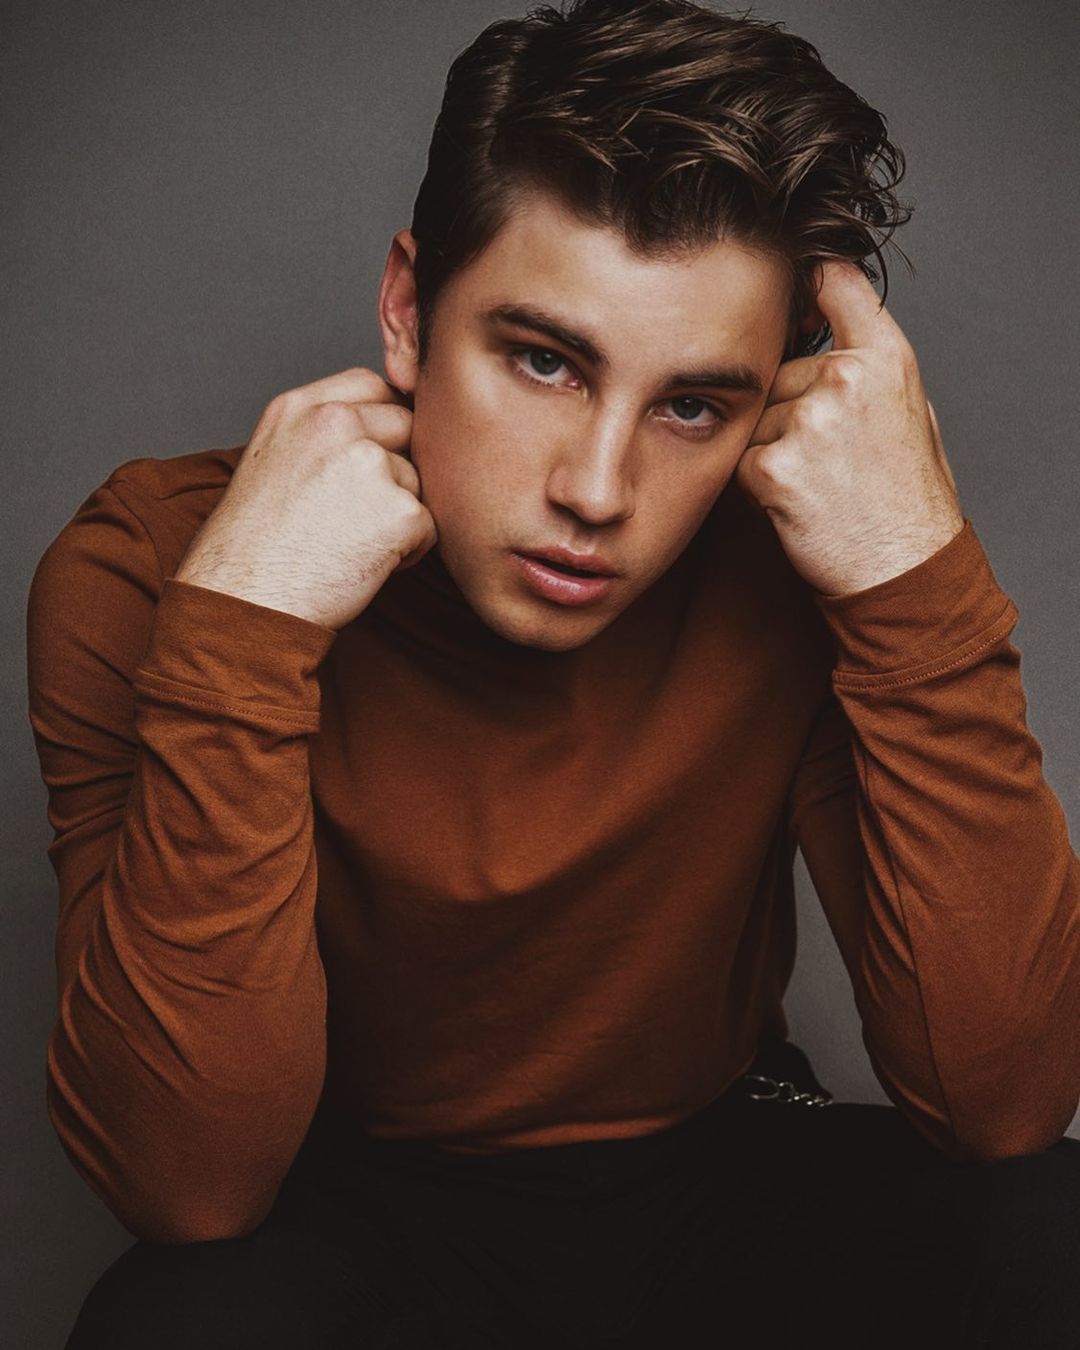 Carson Rowland Biography, Wiki, Girlfriend, Age, Family, Height.. All